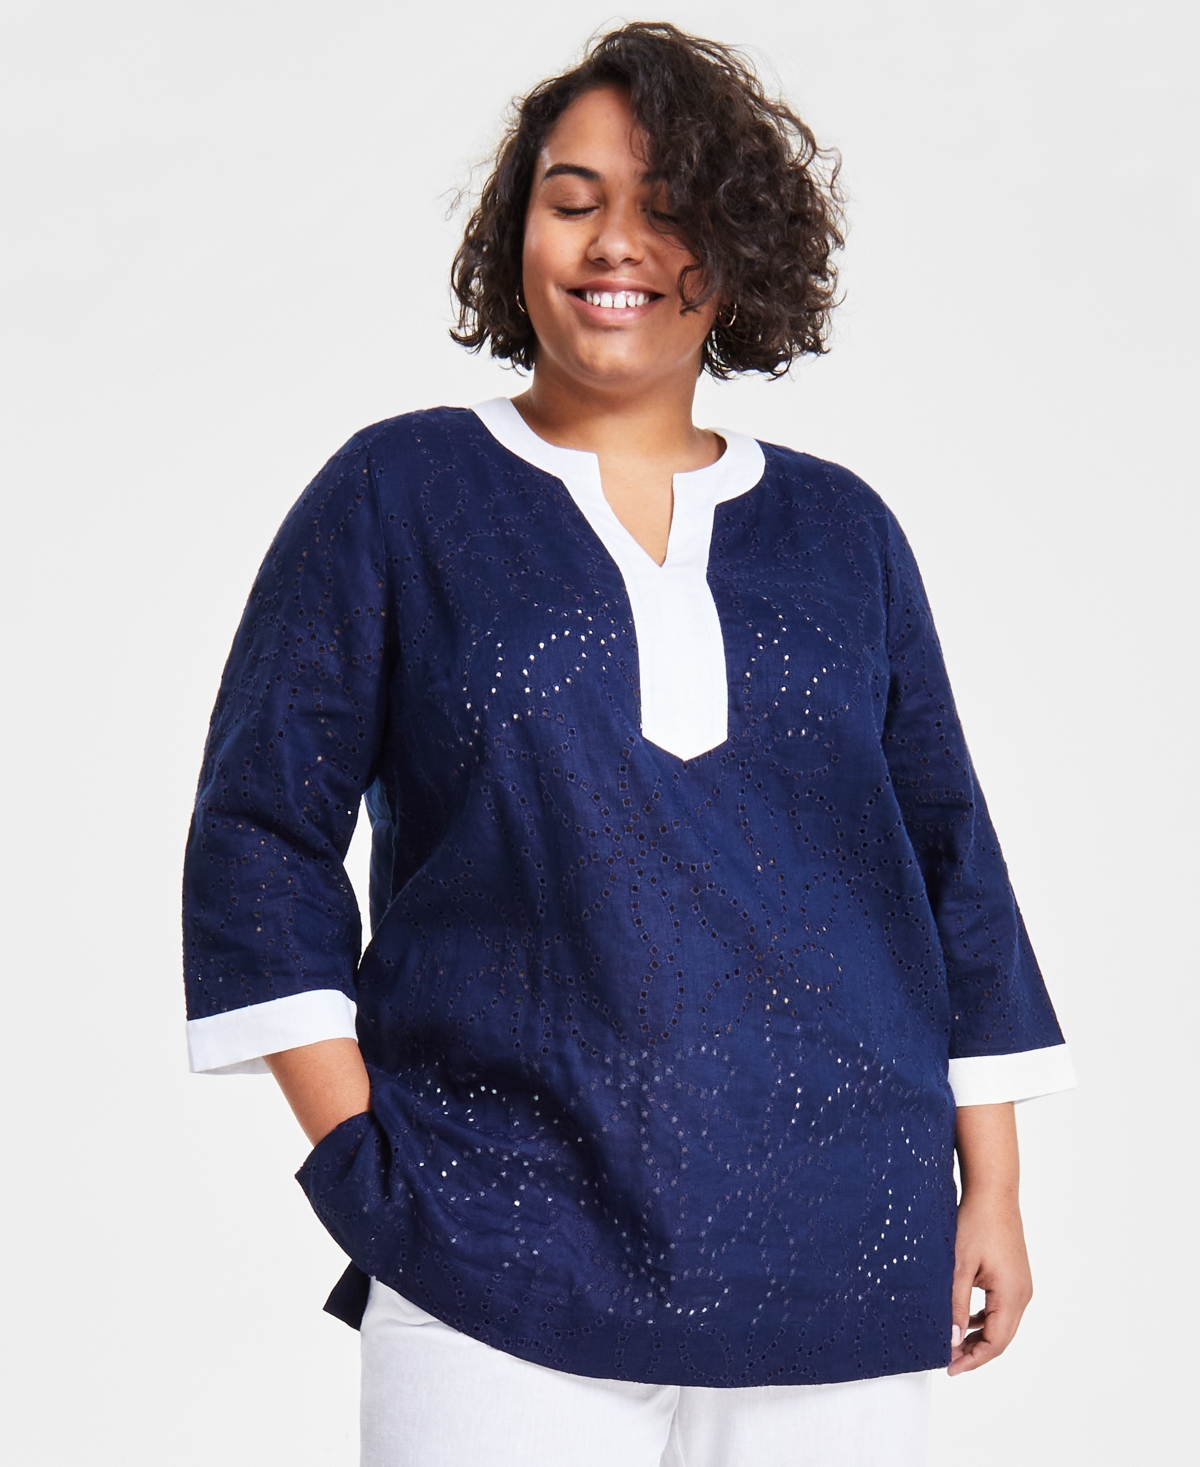 Plus Size 100% Linen Eyelet Tunic Top, Created for Macy's - Intrepid Blue